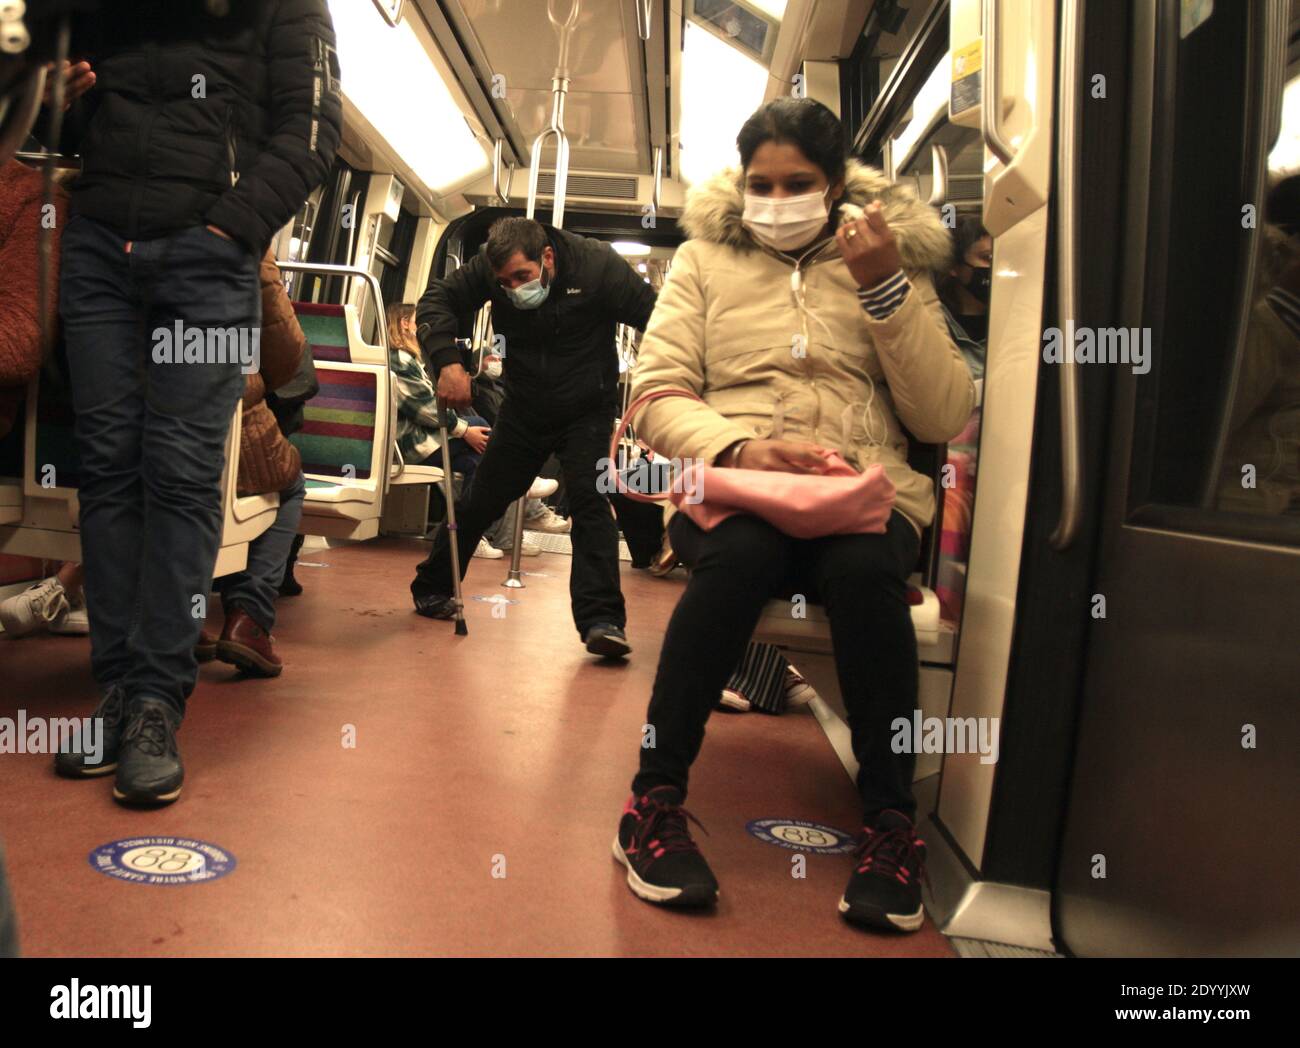 Paris, France. 28th Dec, 2020. A man wearing protective face mask against Covid-19 asks commuters for help on the line 1 subway Paris amid the coronavirus pandemic on December 28, 2020 in Paris, France. According the latest report of the French National Authority for Health (HAS) 175 people died in hospital, and 8,822 new cases of Covid-19 infection, strict measures are still in place as curfew from 8:00 p.m. to 6:00 a.m. was put in place in all territory French. (Photo by Paulo Amorim/Sipa USA) Credit: Sipa USA/Alamy Live News Stock Photo